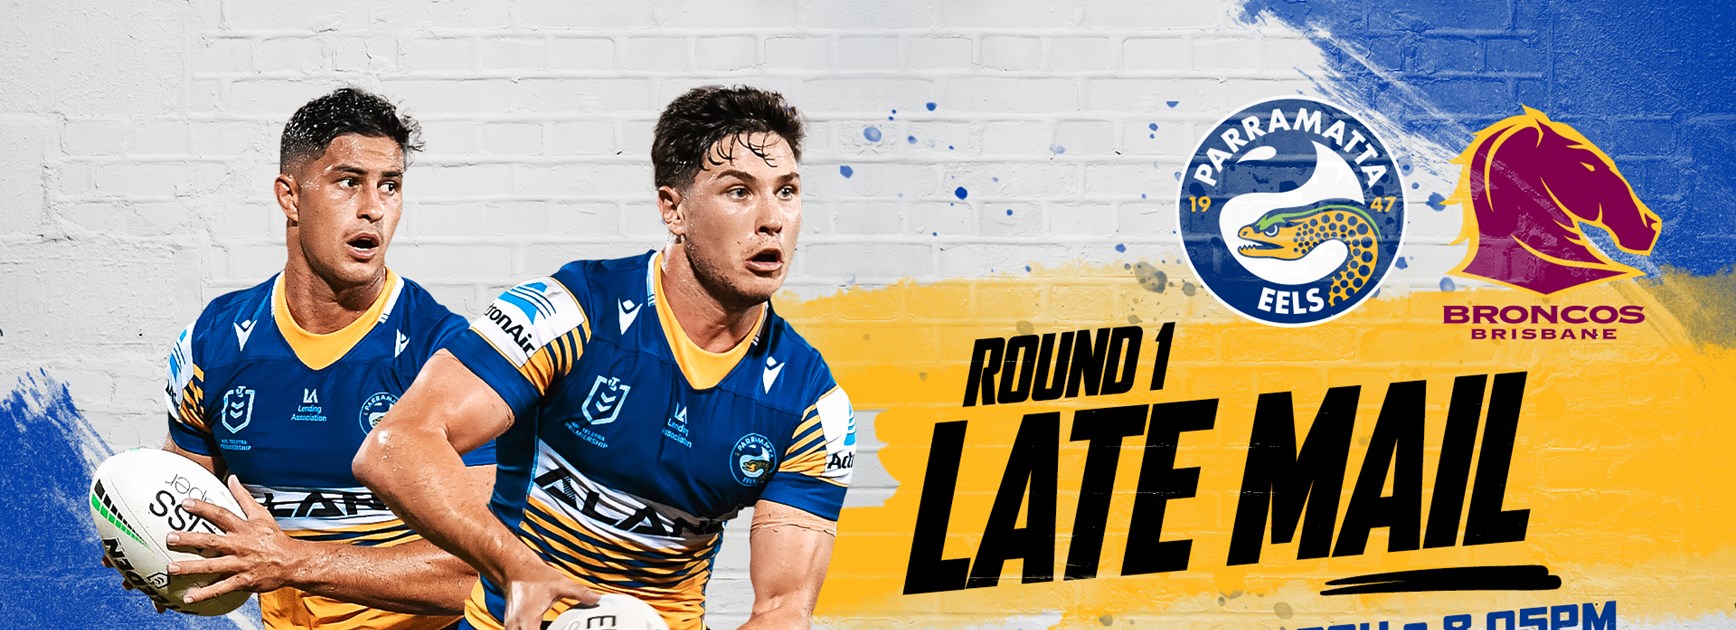 Late Mail – Broncos v Eels, Round One